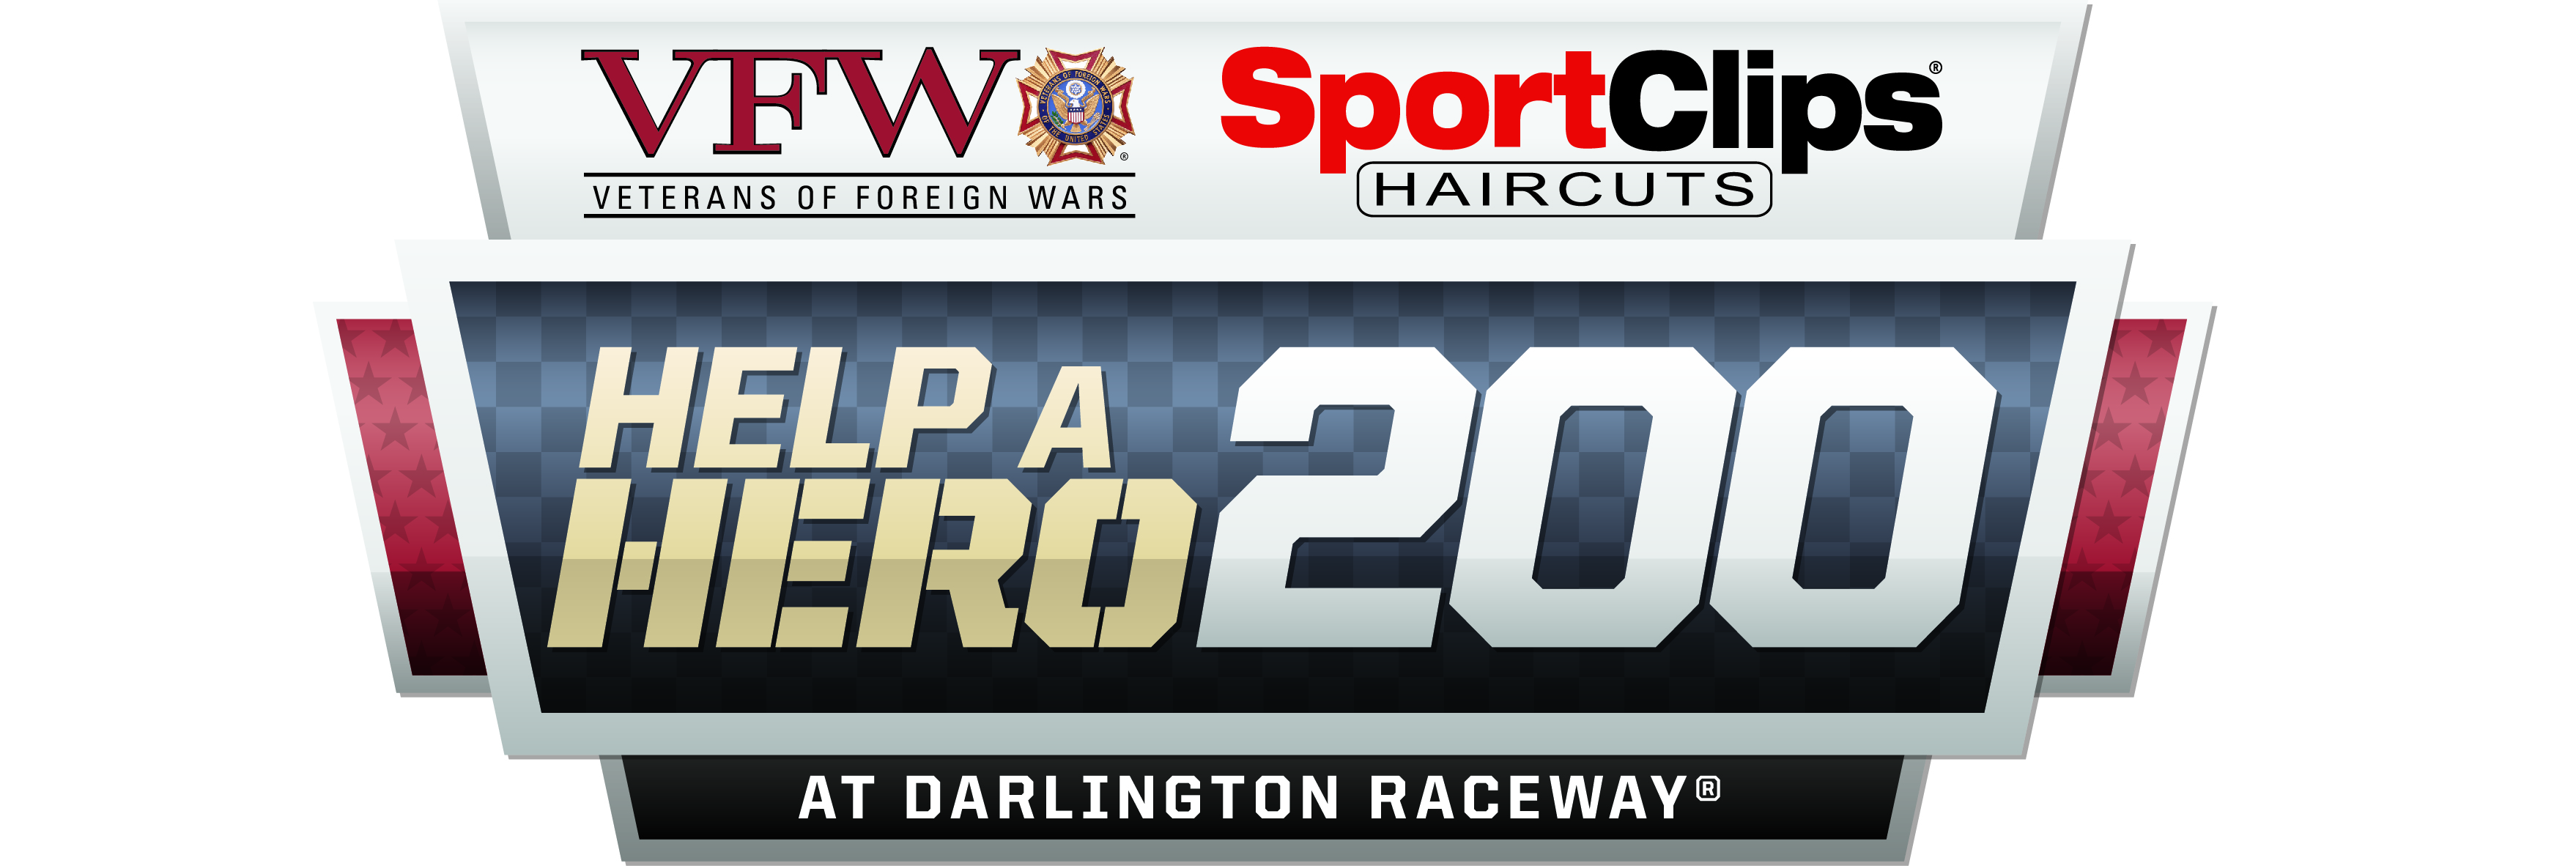 Nationwide Series at Darlington: Starting Lineup, green flag start time and tv info for Help A Hero 200